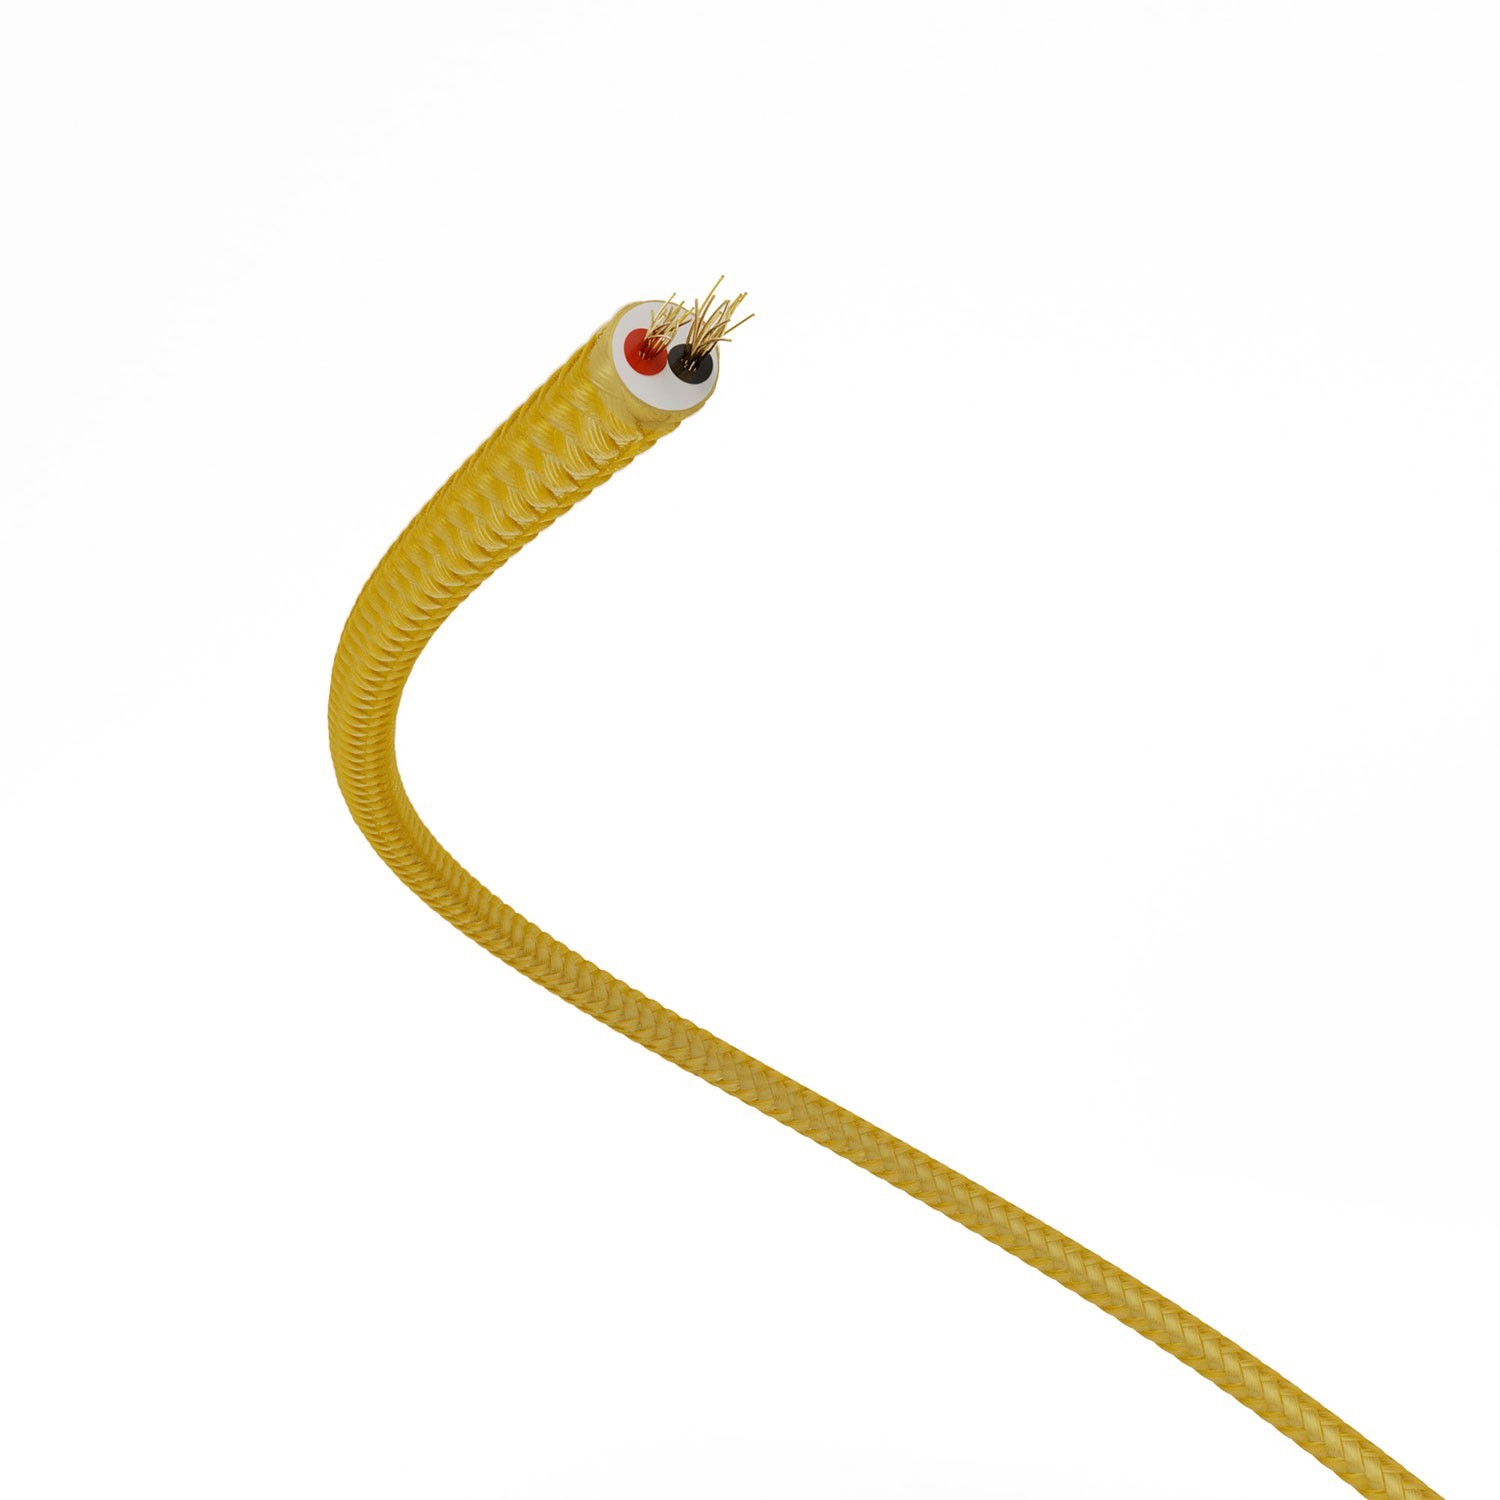 Extra Low Voltage power cable coated in silk effect fabric Gold RM05 - 50 m